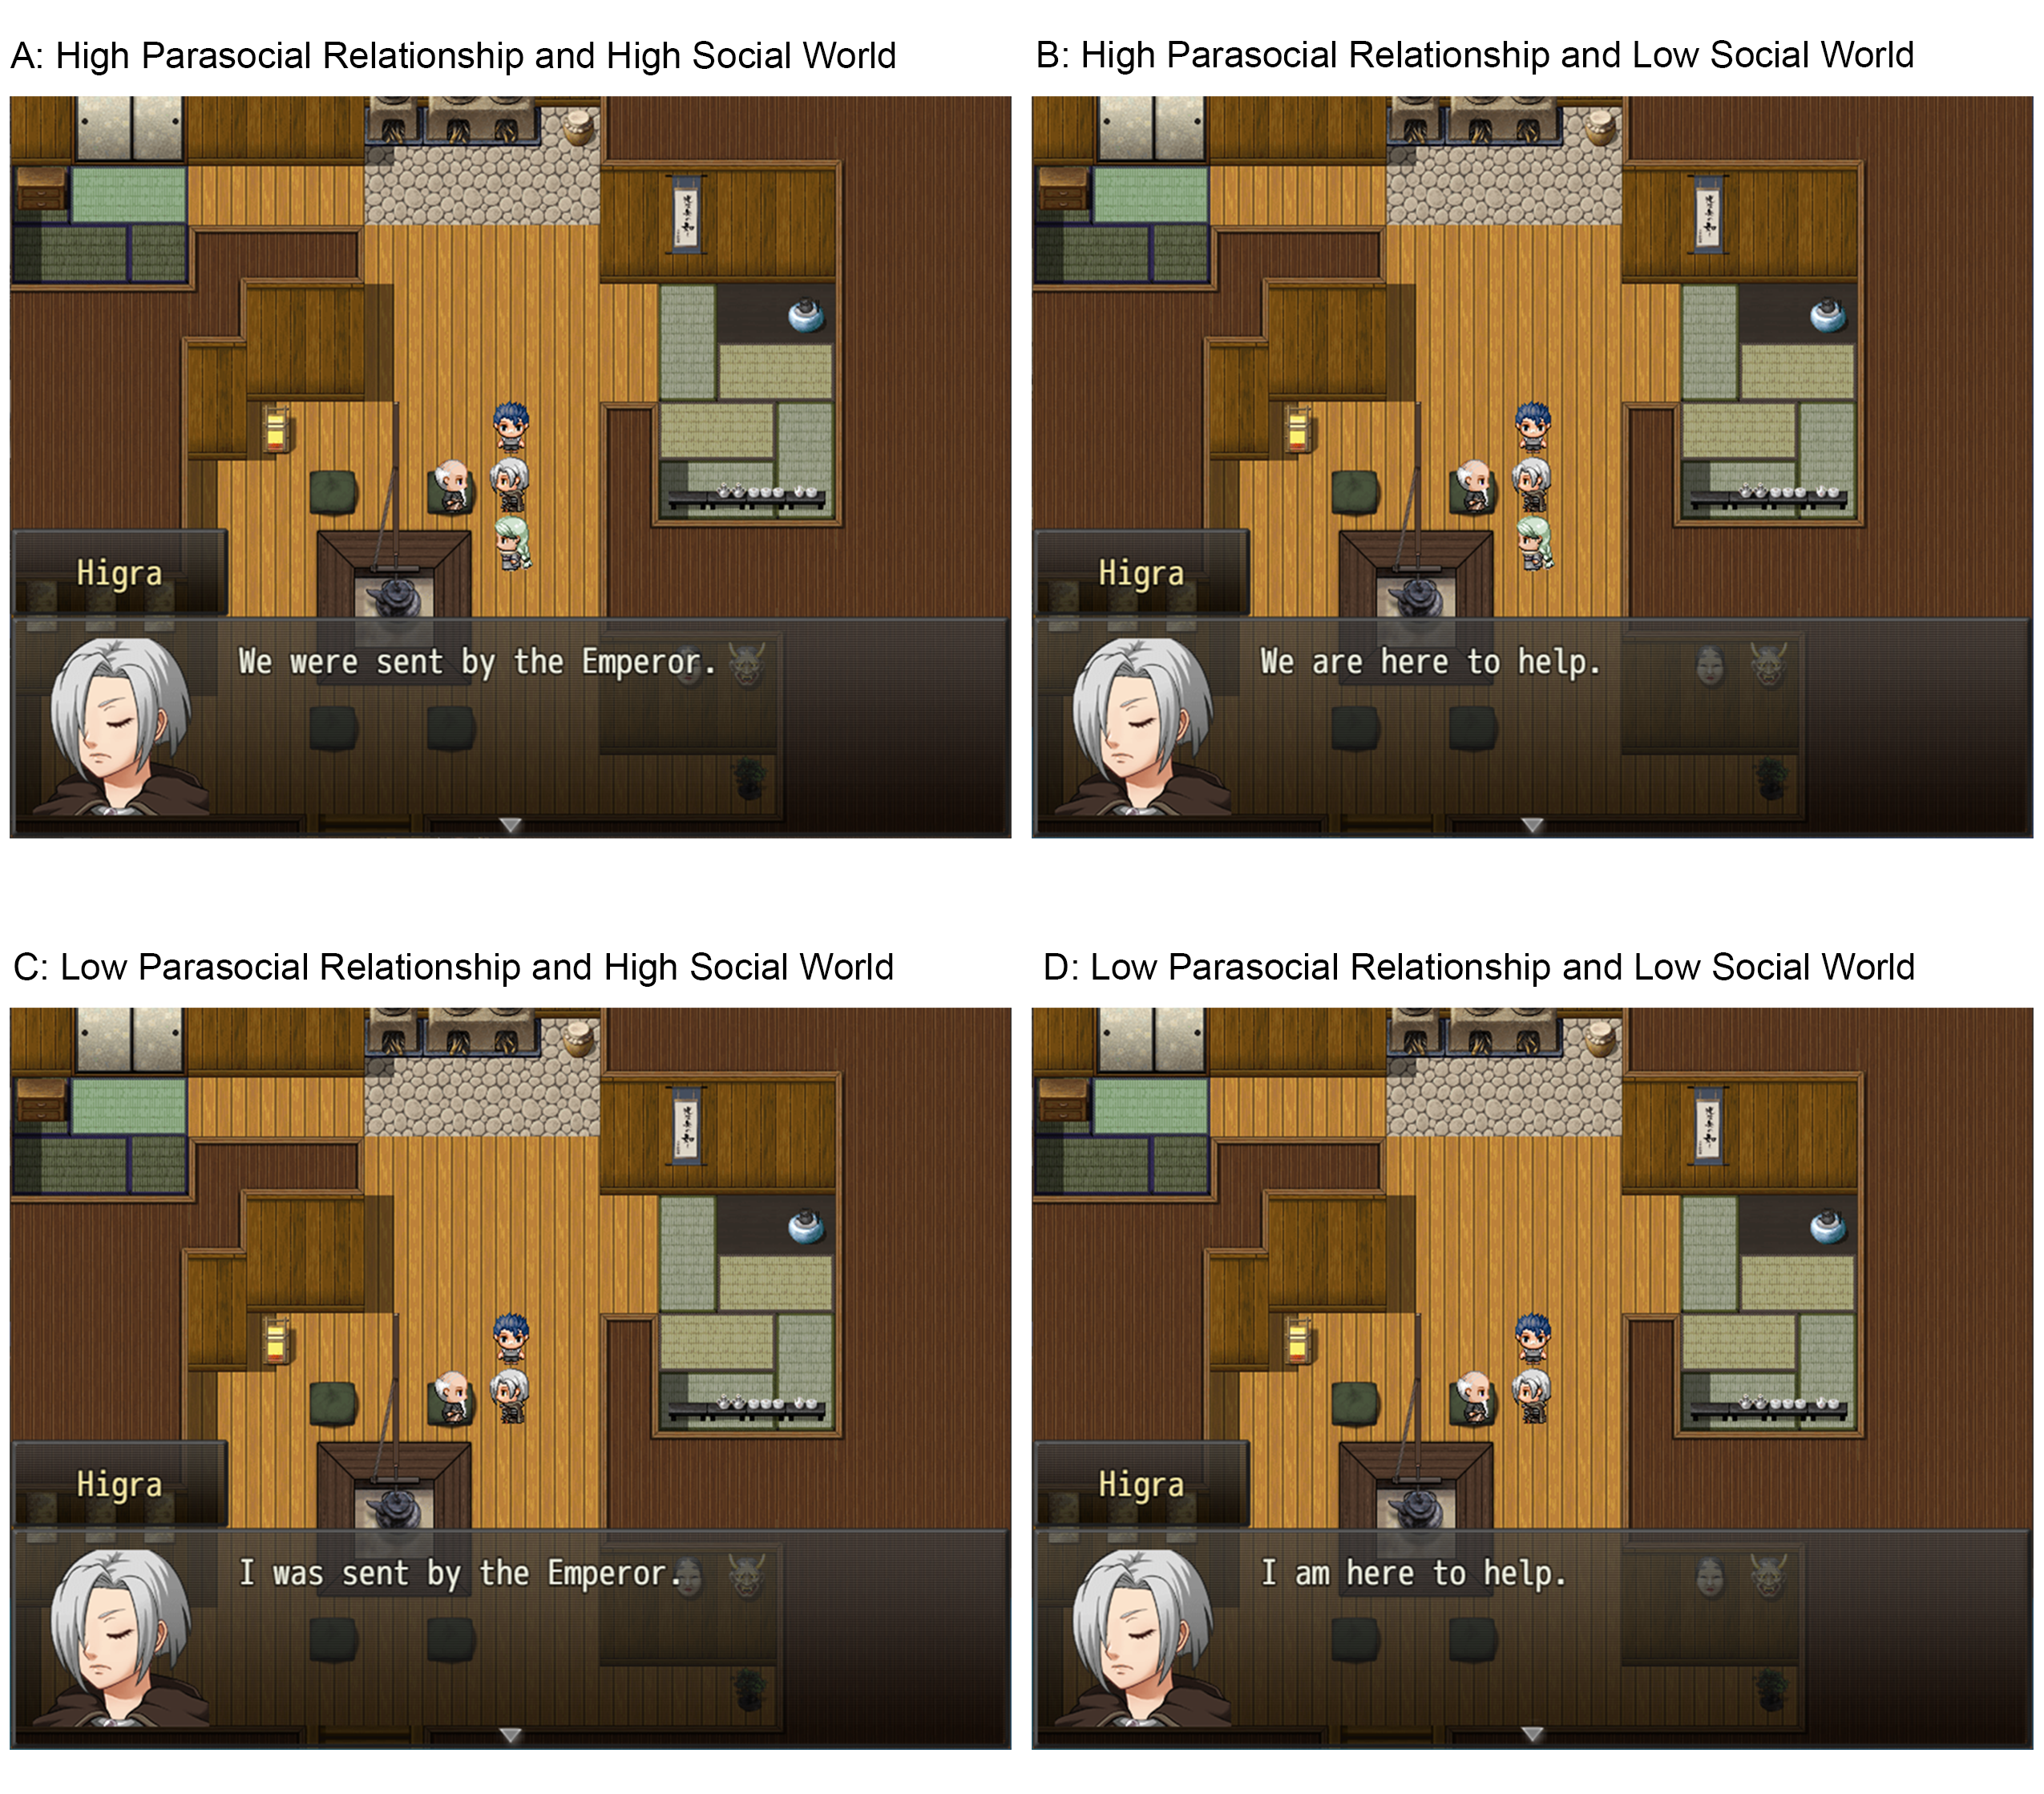 Screenshots from the Custom Video Game, Shadows of Gaki. In the high parasocial relationship conditions (Panels A and B), participants saw a non-player character (Sashu) who followed the player throughout the gameplay. In the low parasocial relationship conditions (Panels B and D), the non-player character was absent. In the high social world conditions (Panels A and B), participants learned about the story that Higra answered the Emperor's call to be a Samga and to reunite with Mother. In the low social world condition, participants will not learn about the story.